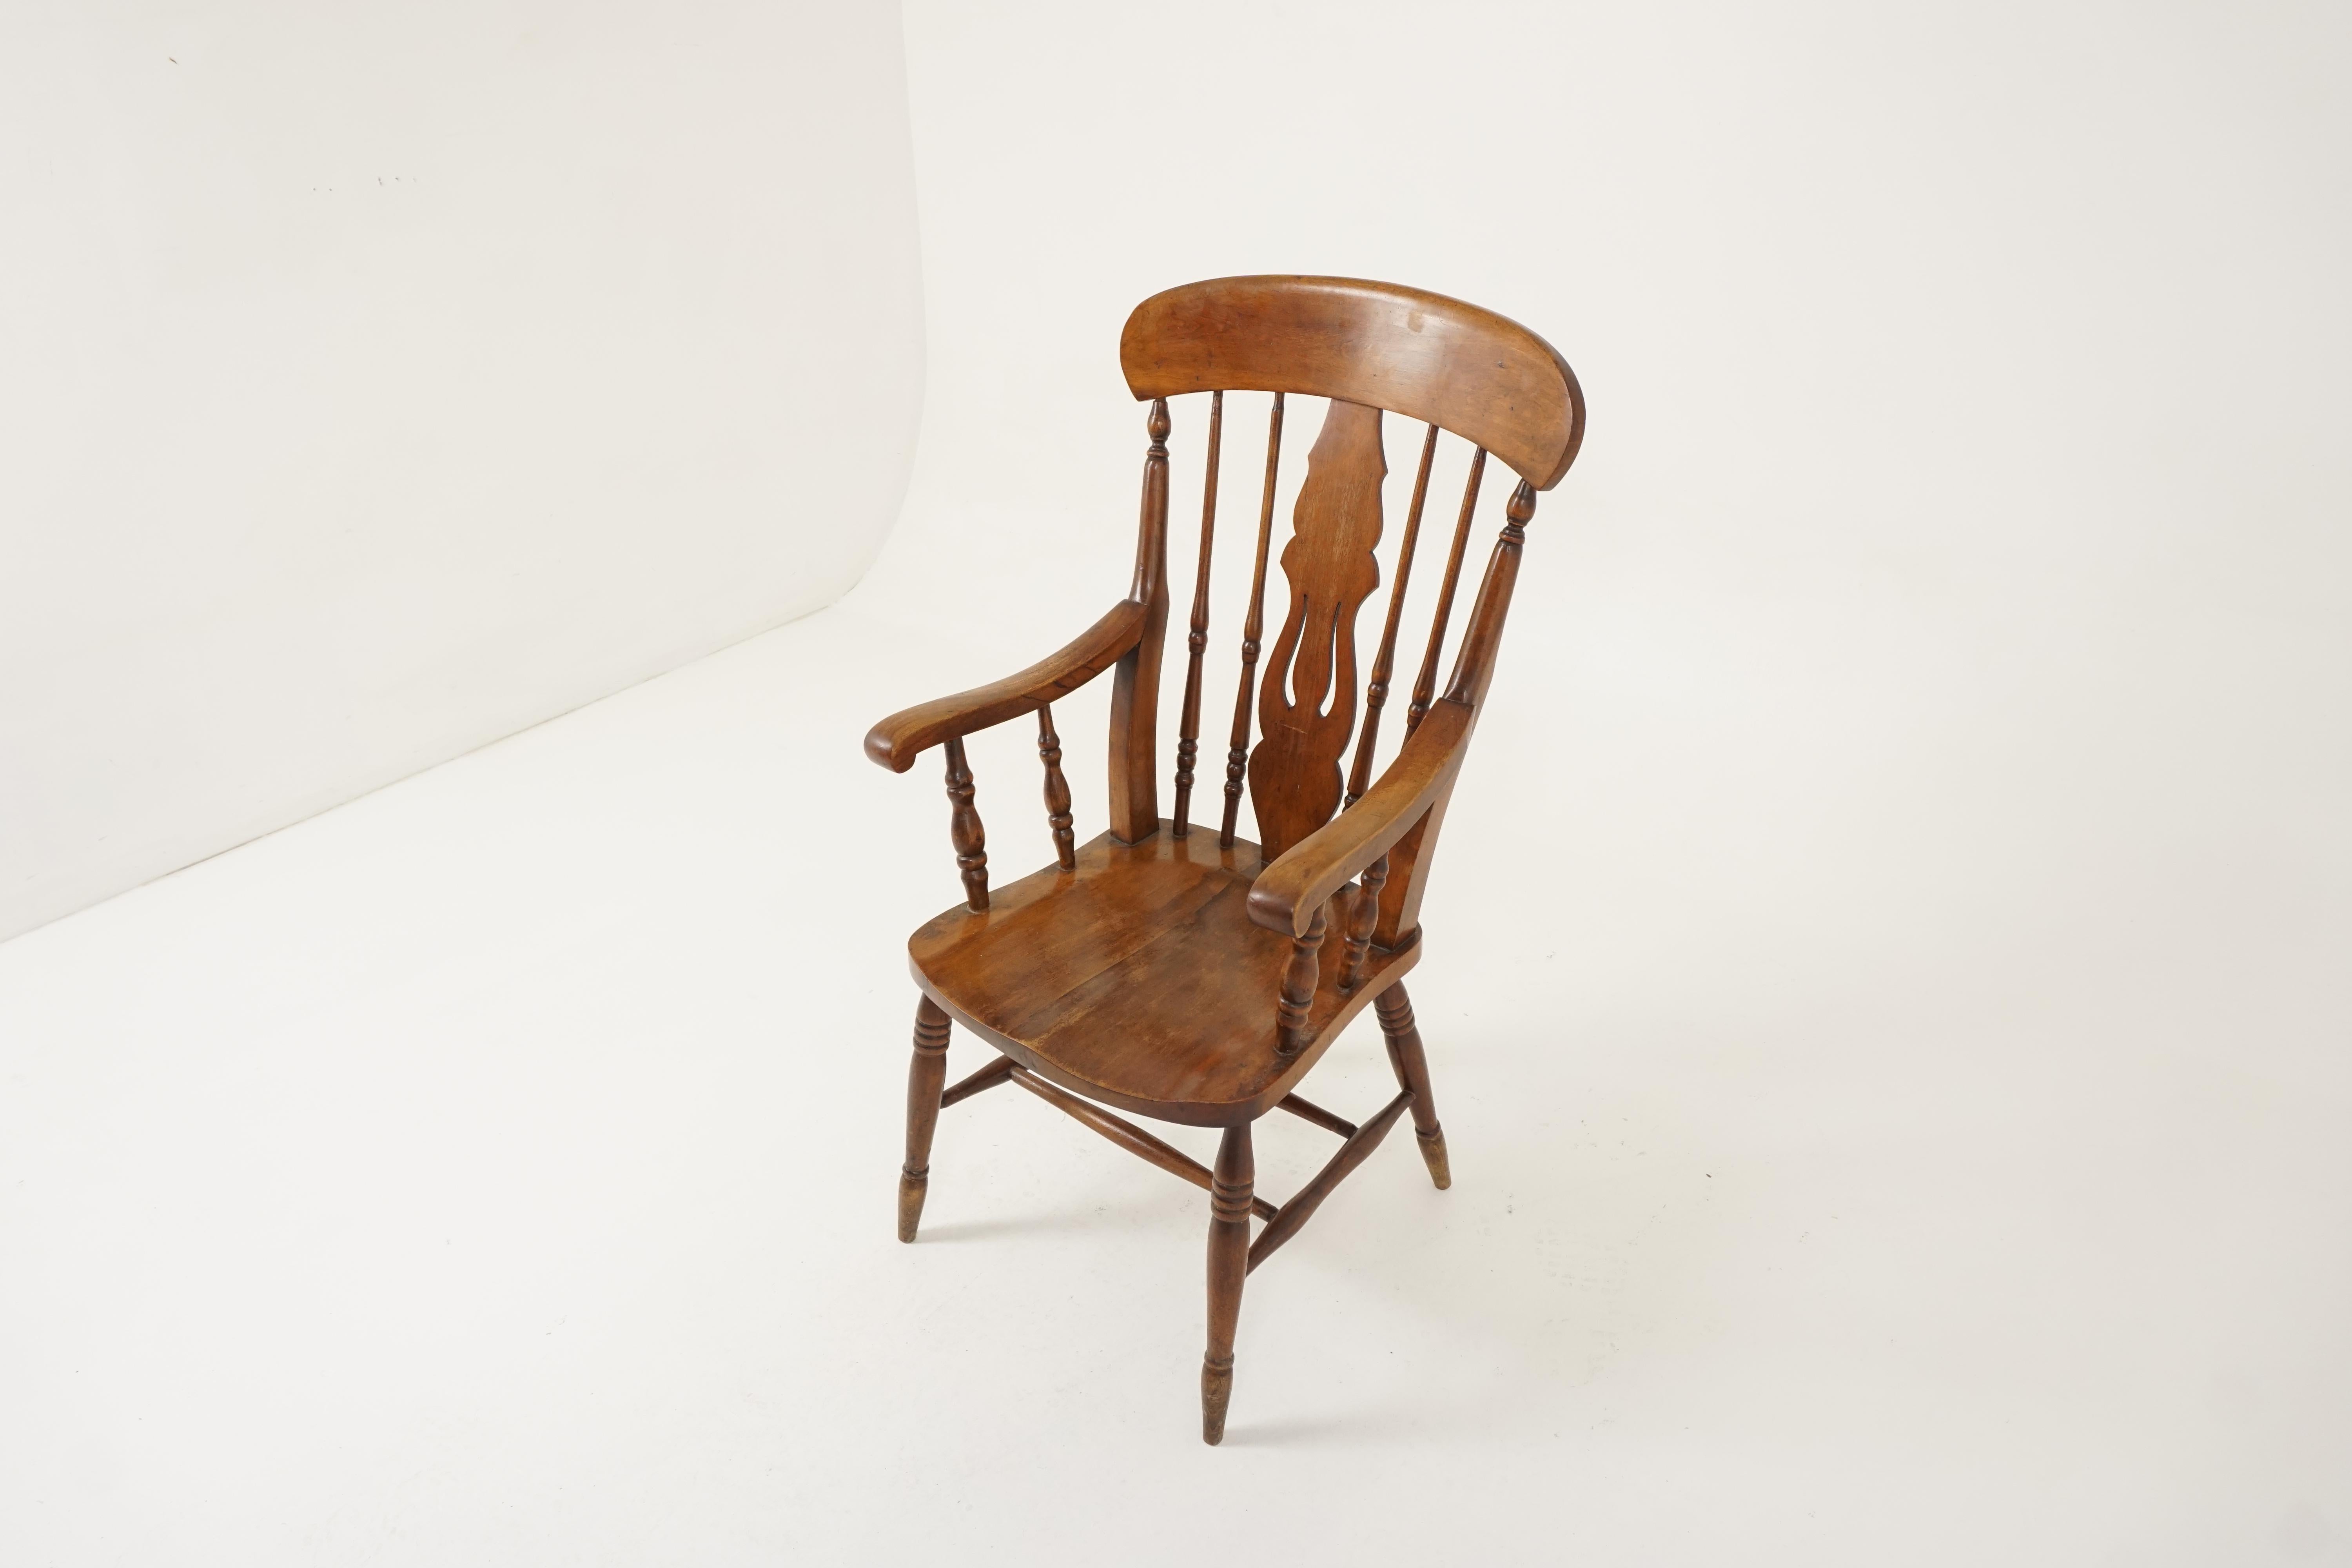 Antique arm chair, Windsor high back, country beech chair, Scotland 1880, B2366

Scotland, 1880
Solid beechwood
Original finish
Broad top rail
Center splat with turned spindles to the back
Nice swept out curved arms with turned supports